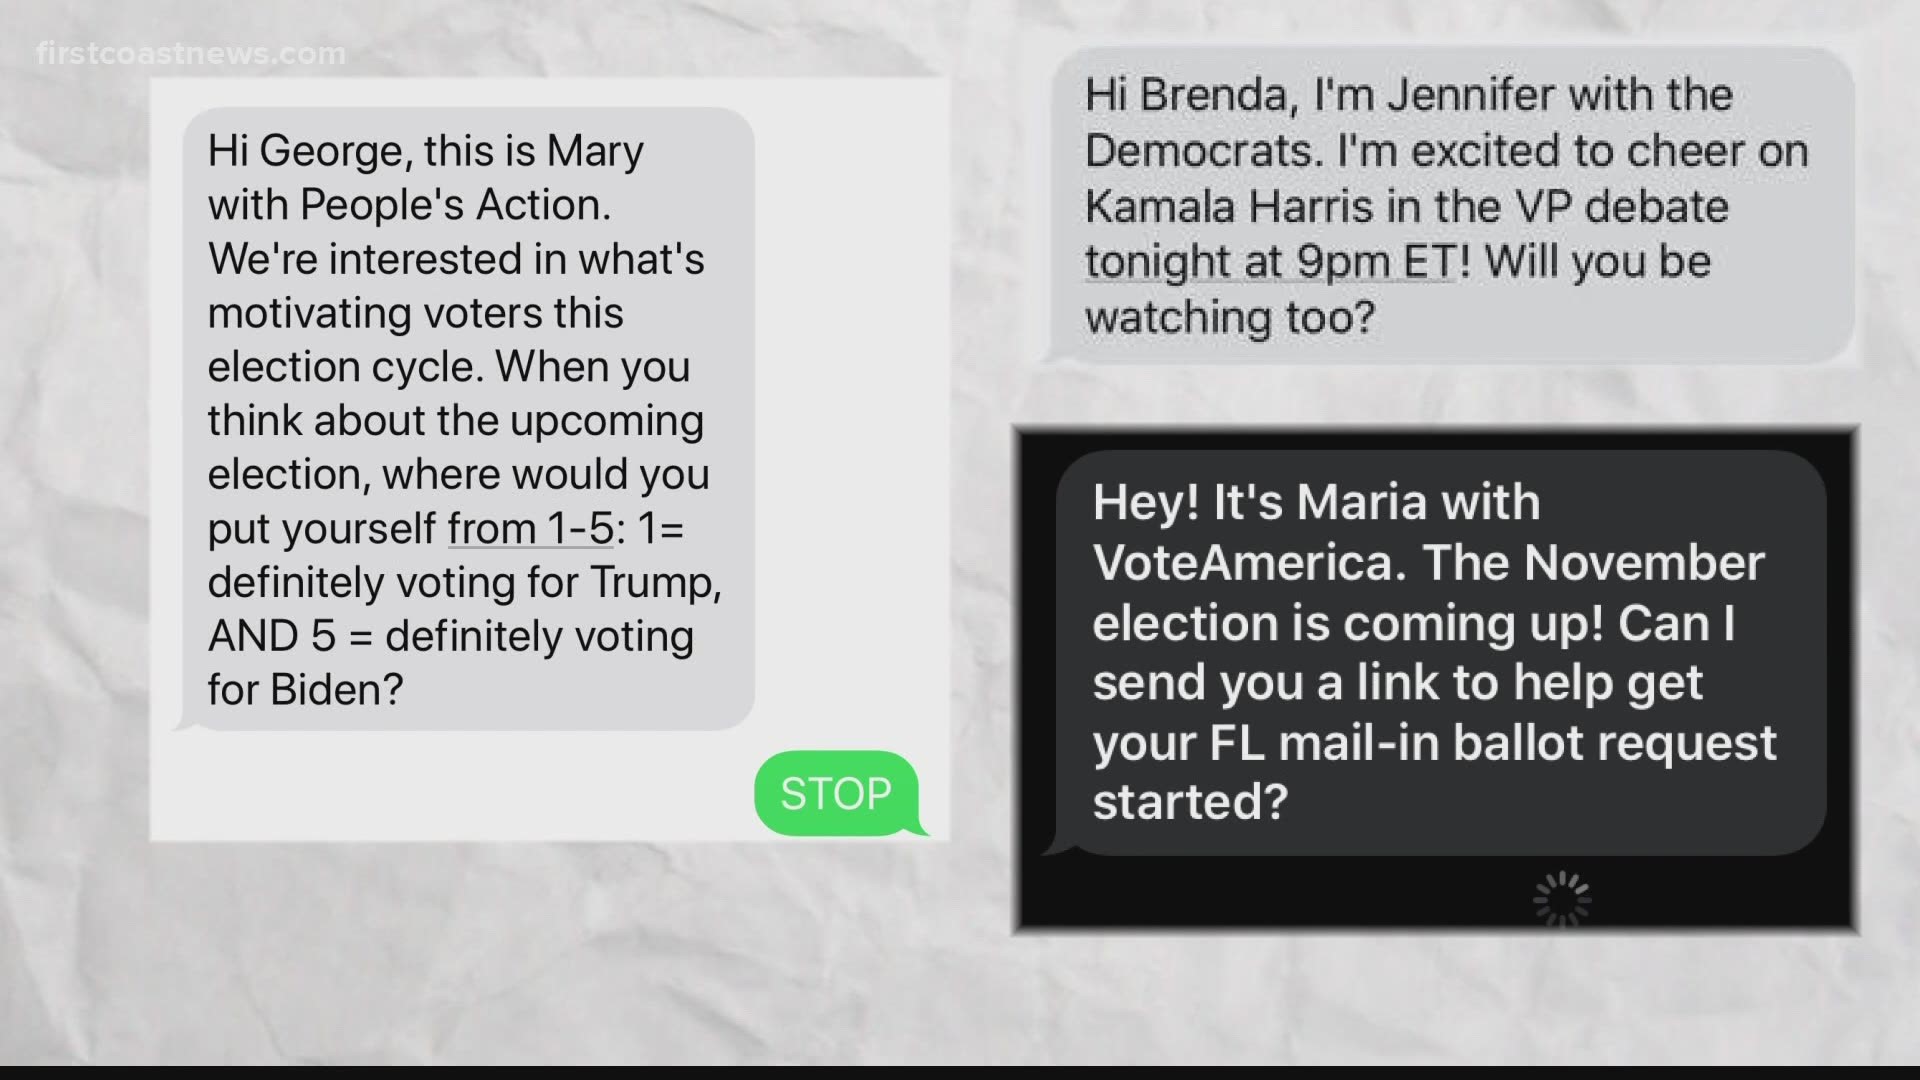 Tired of those political text messages? Here's how to make them stop